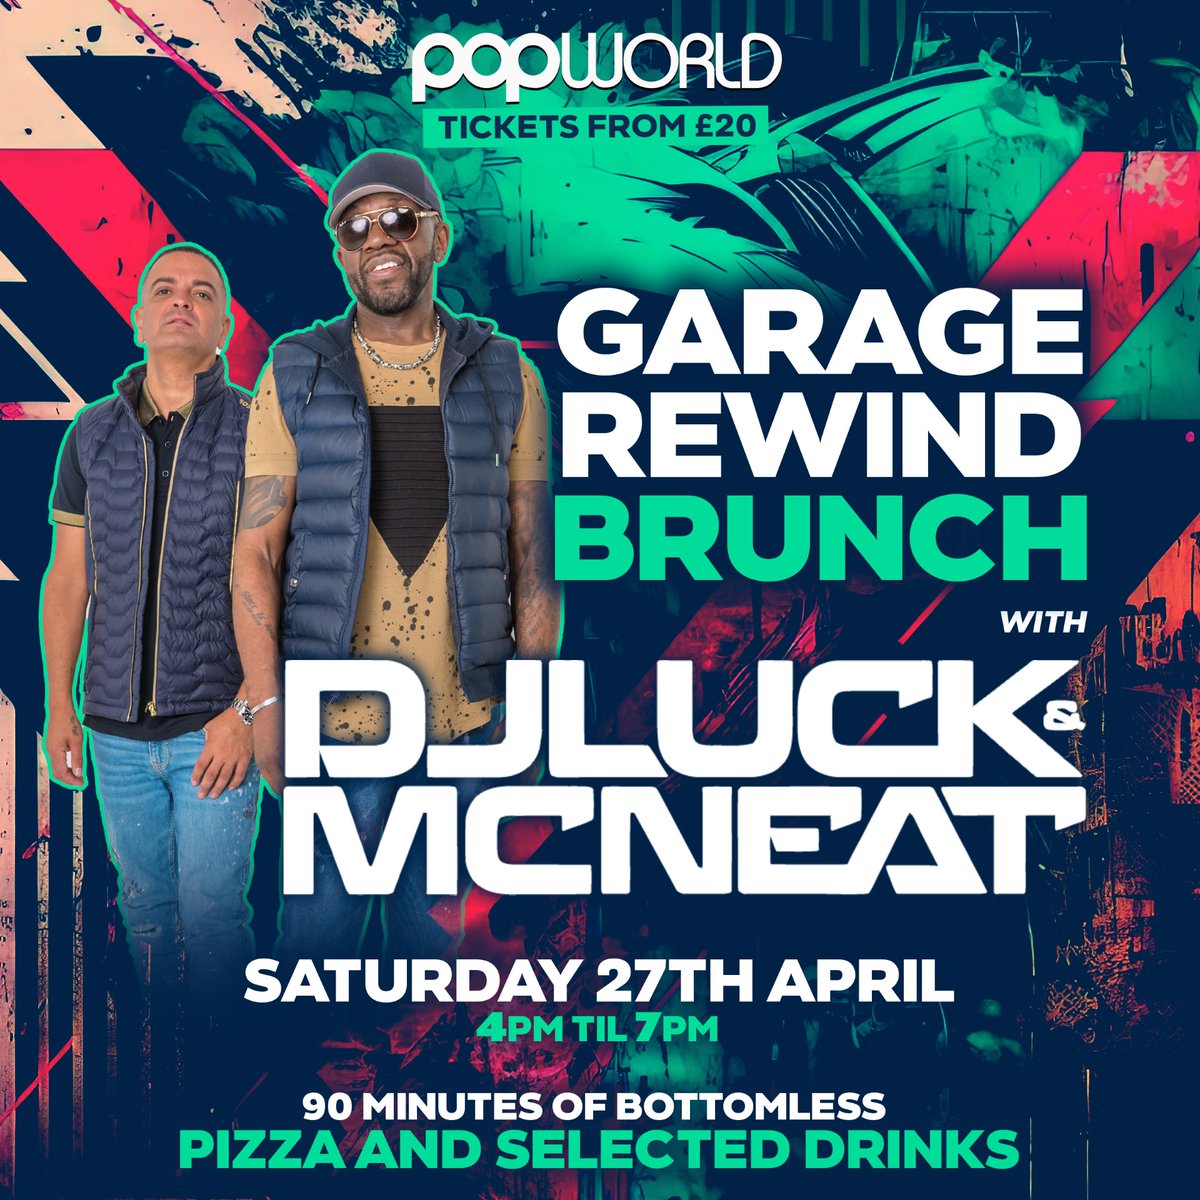 Last chance to book your tickets to the @PopworldMK Garage Brunch this Saturday 27 April! 🎧 DJ Luck & MC Neat will be in da house with the non-stop tunes and you'll also get 90 minutes of bottomless pizza and selected drinks! 🍕🍹 Book here: popworldparty.co.uk/milton-keynes/…